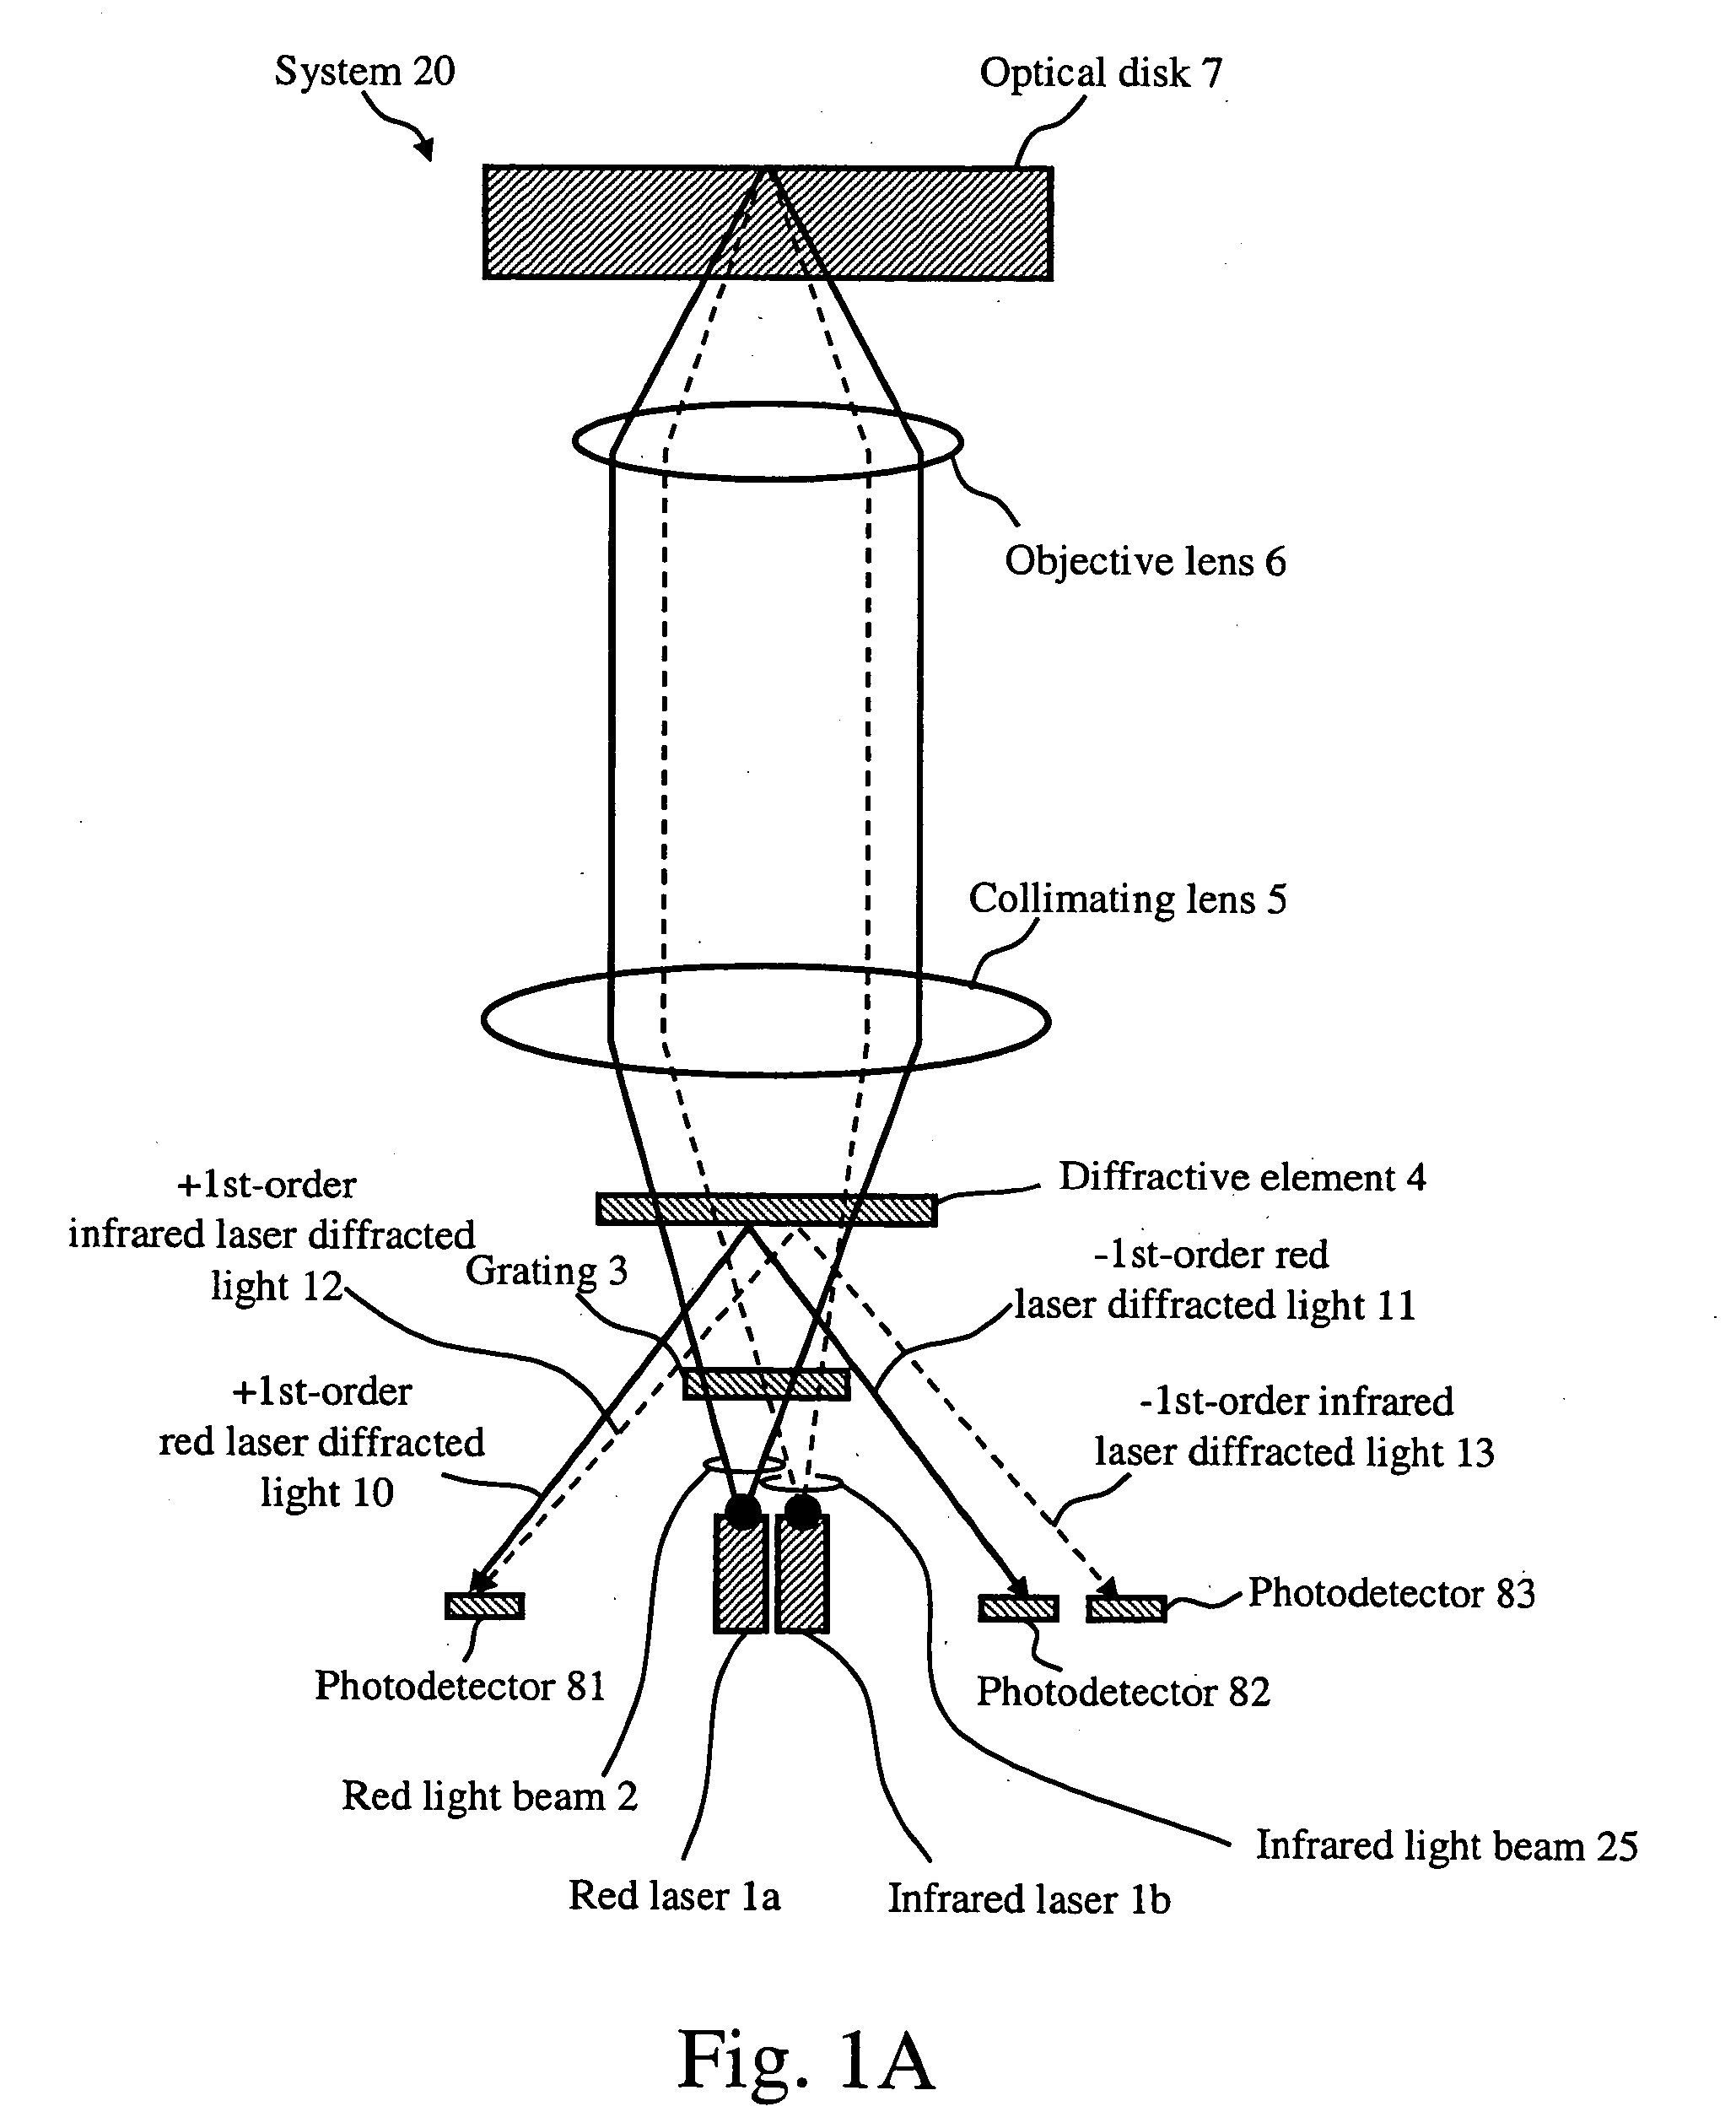 Optical pick-up system for use in an optical disk device including use of improved gratings with more efficient beam diffraction